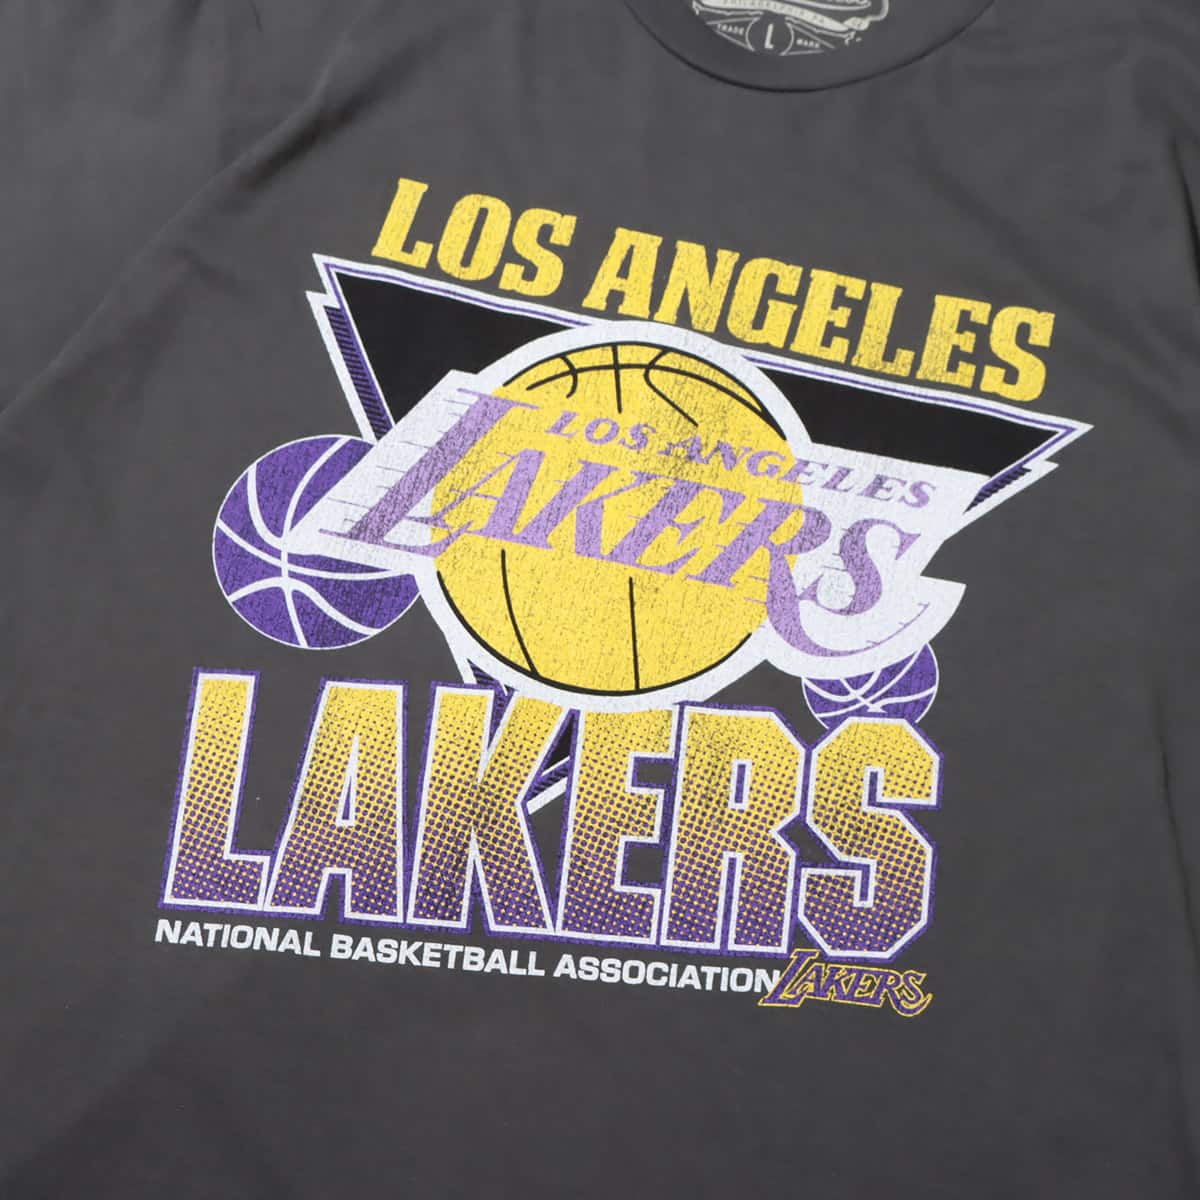 Mitchell & Ness NBA VINTAGE CRACKED TEE LAKERS BLACK 23SS-I